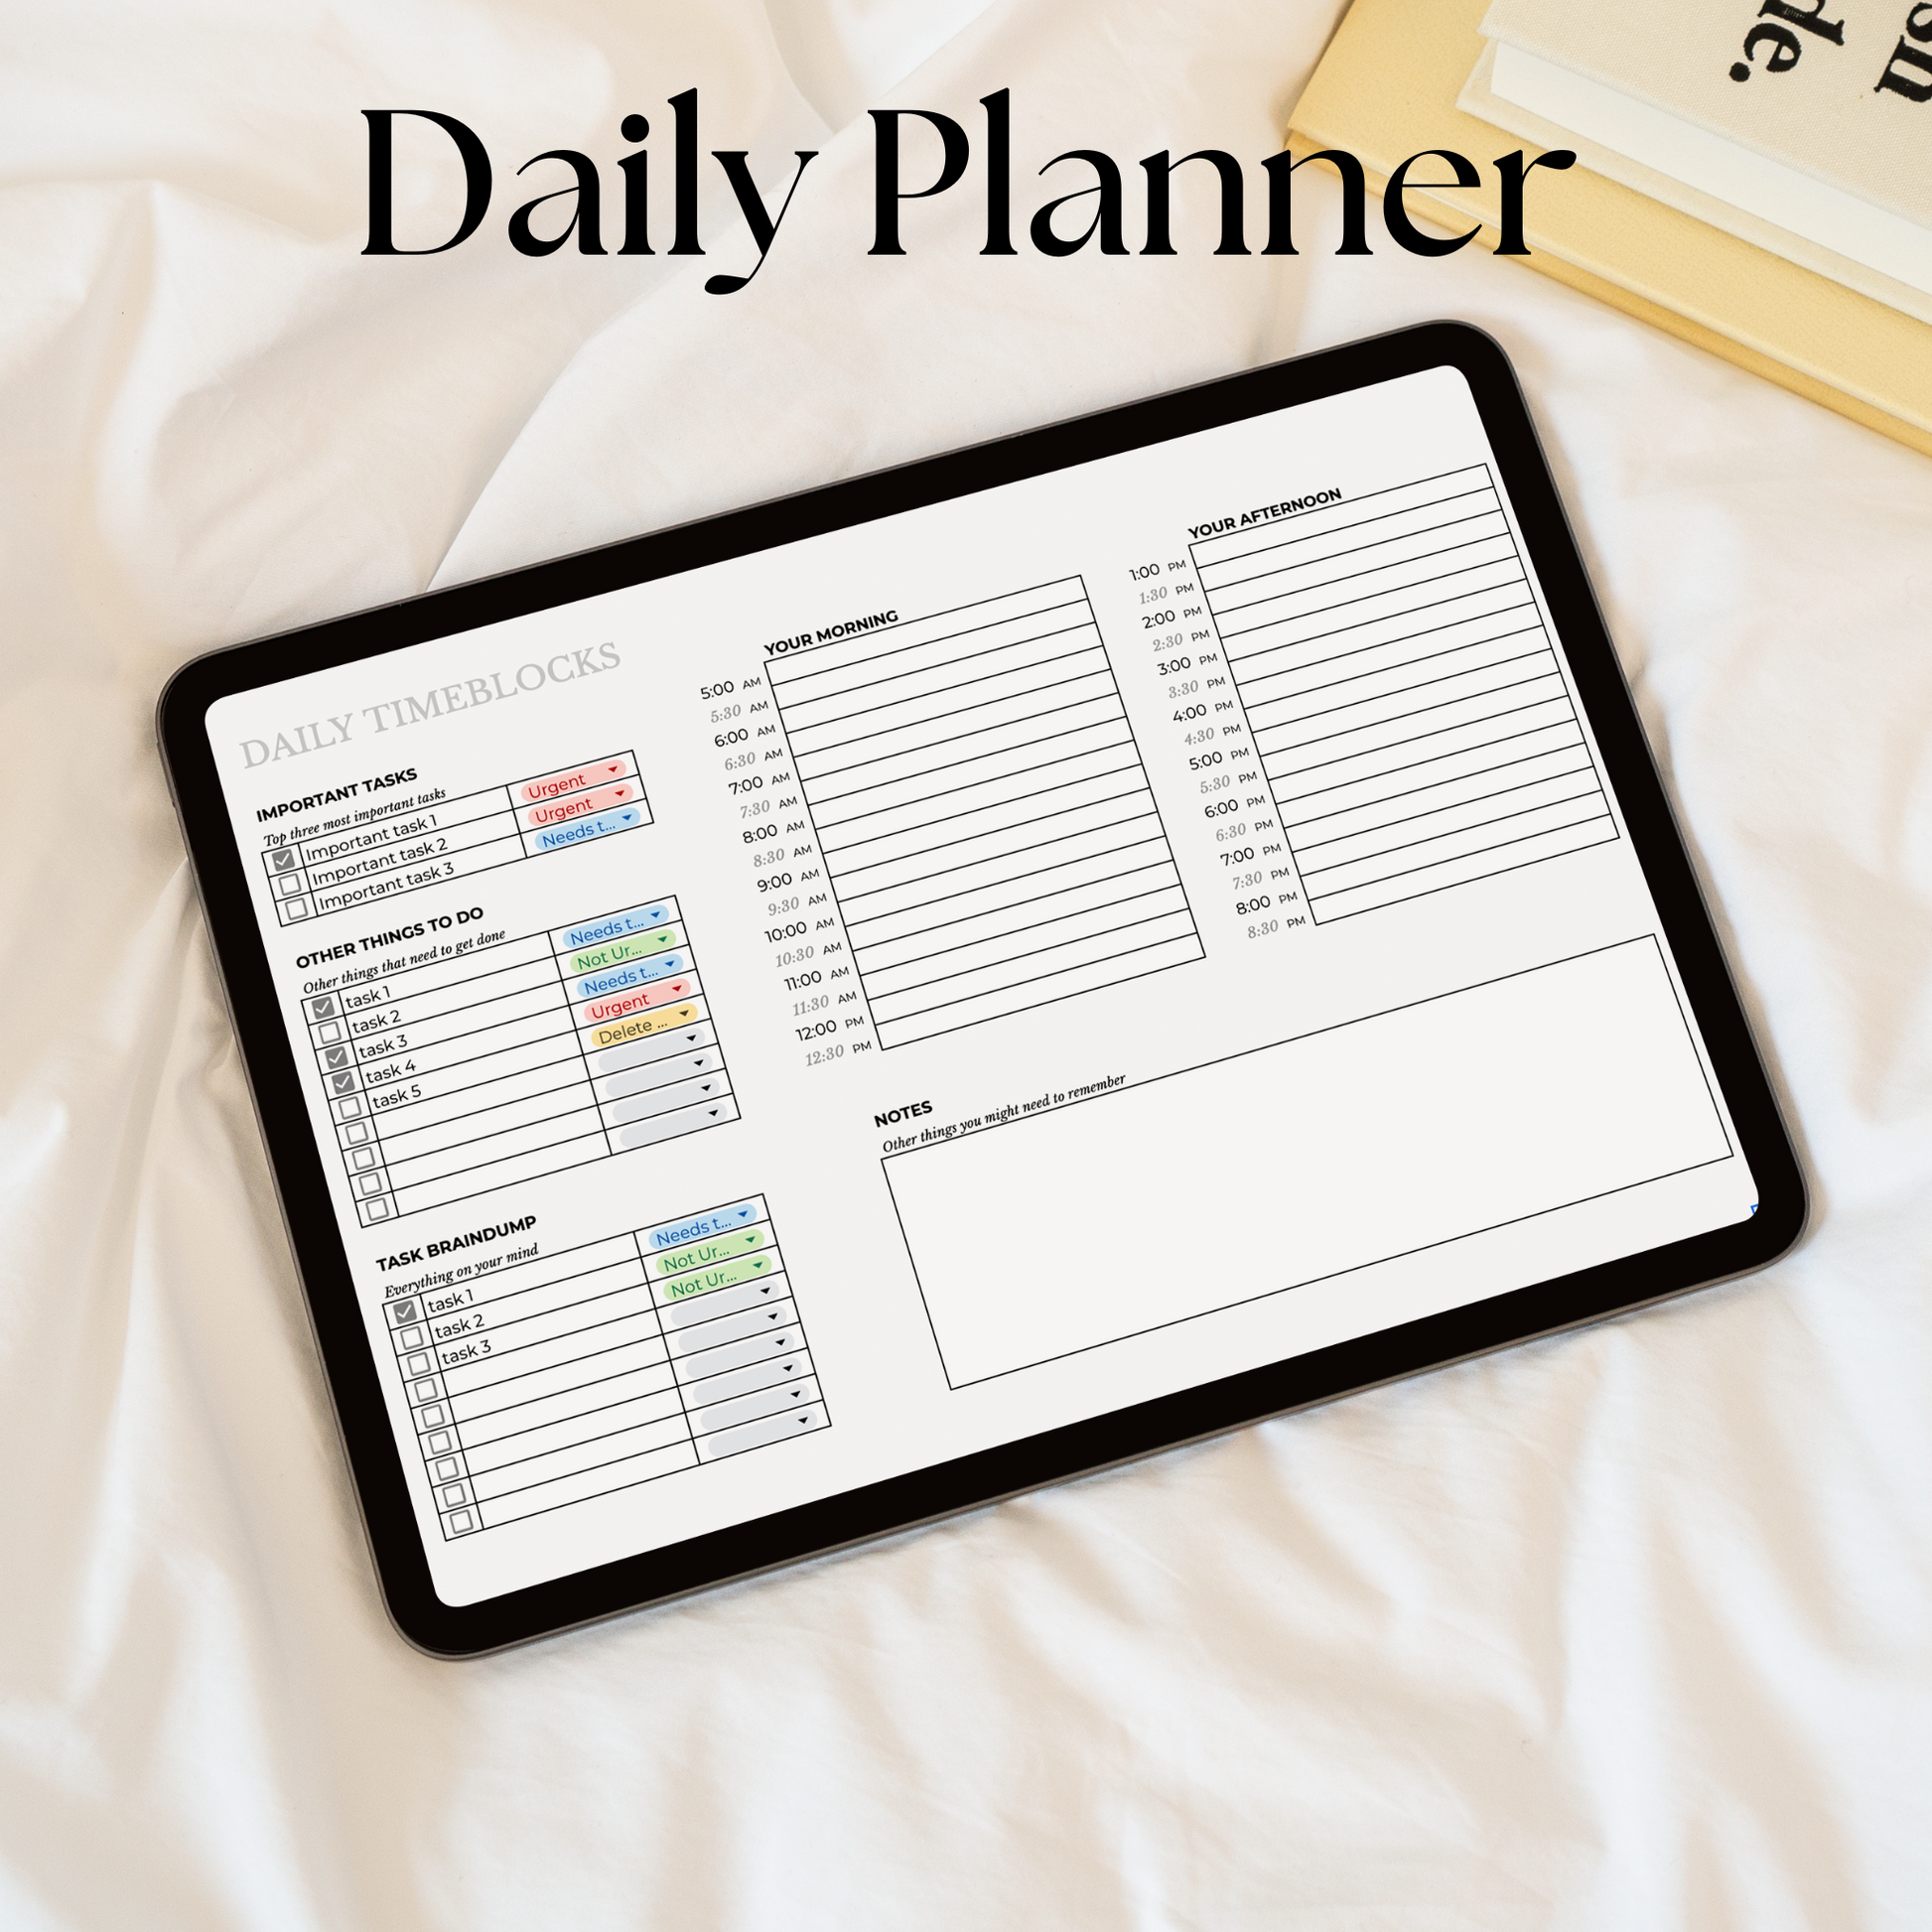 Daily time block sheet productivity tool for google sheets. daily planner